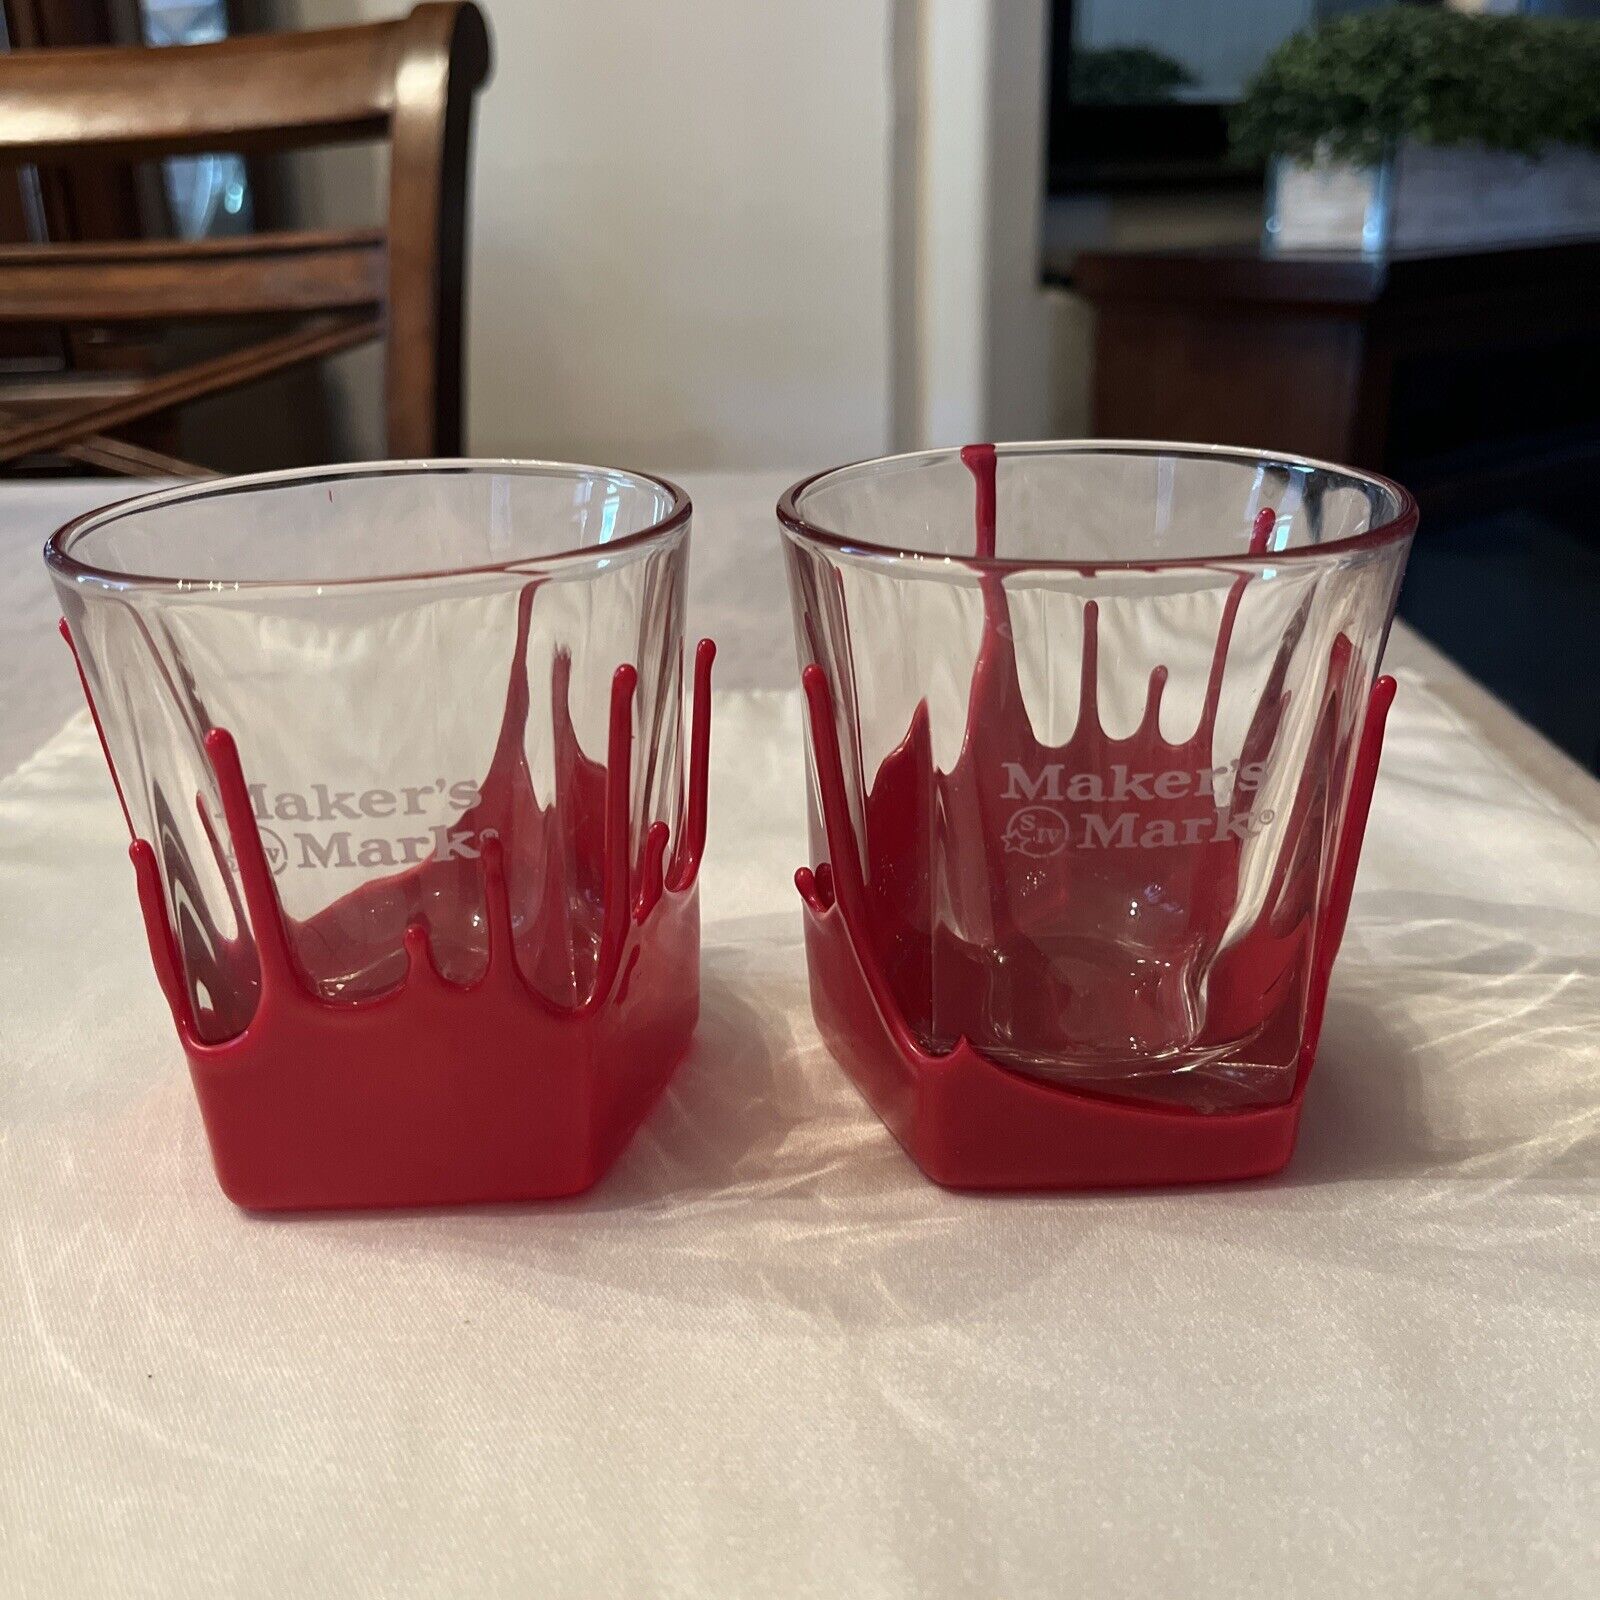 Set of 2 Makers Mark Bourbon Double old fashioned rocks Glasses Red